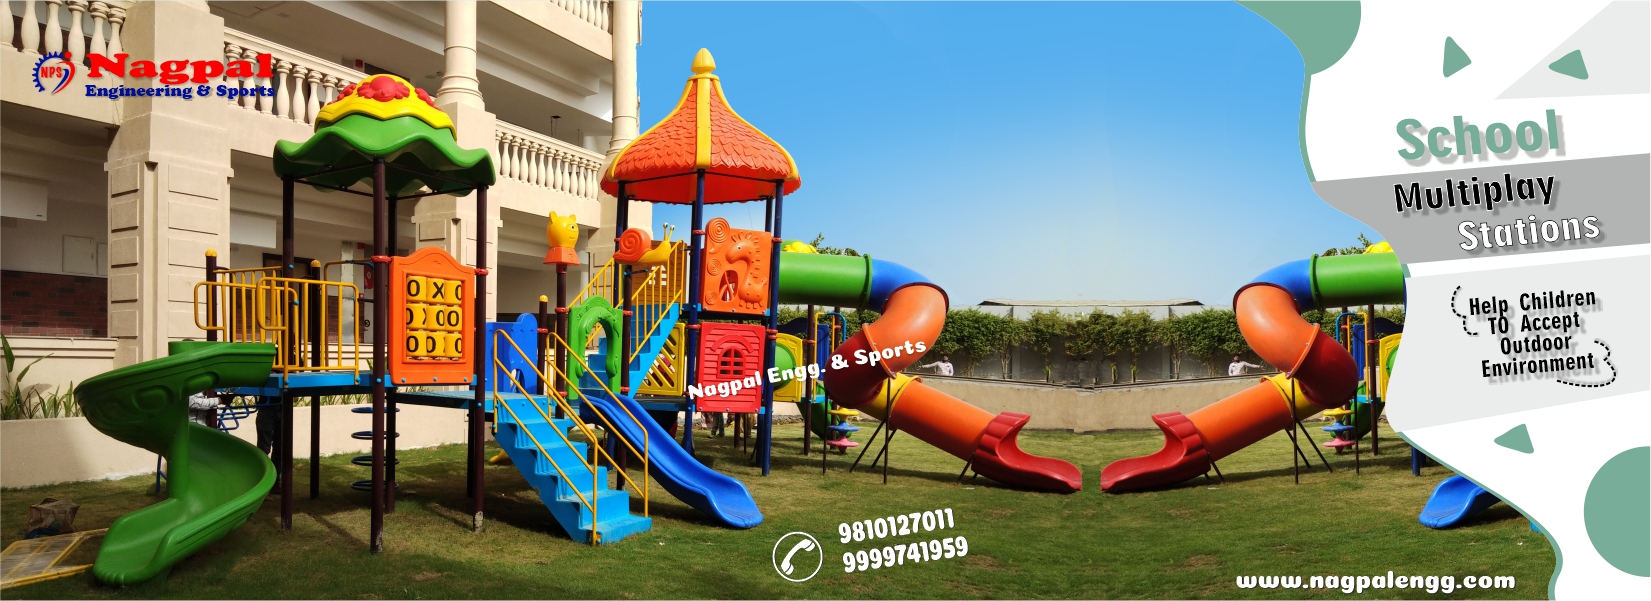 Roto Multiplay System Manufacturers, Exporters & Suppliers in Haridwar